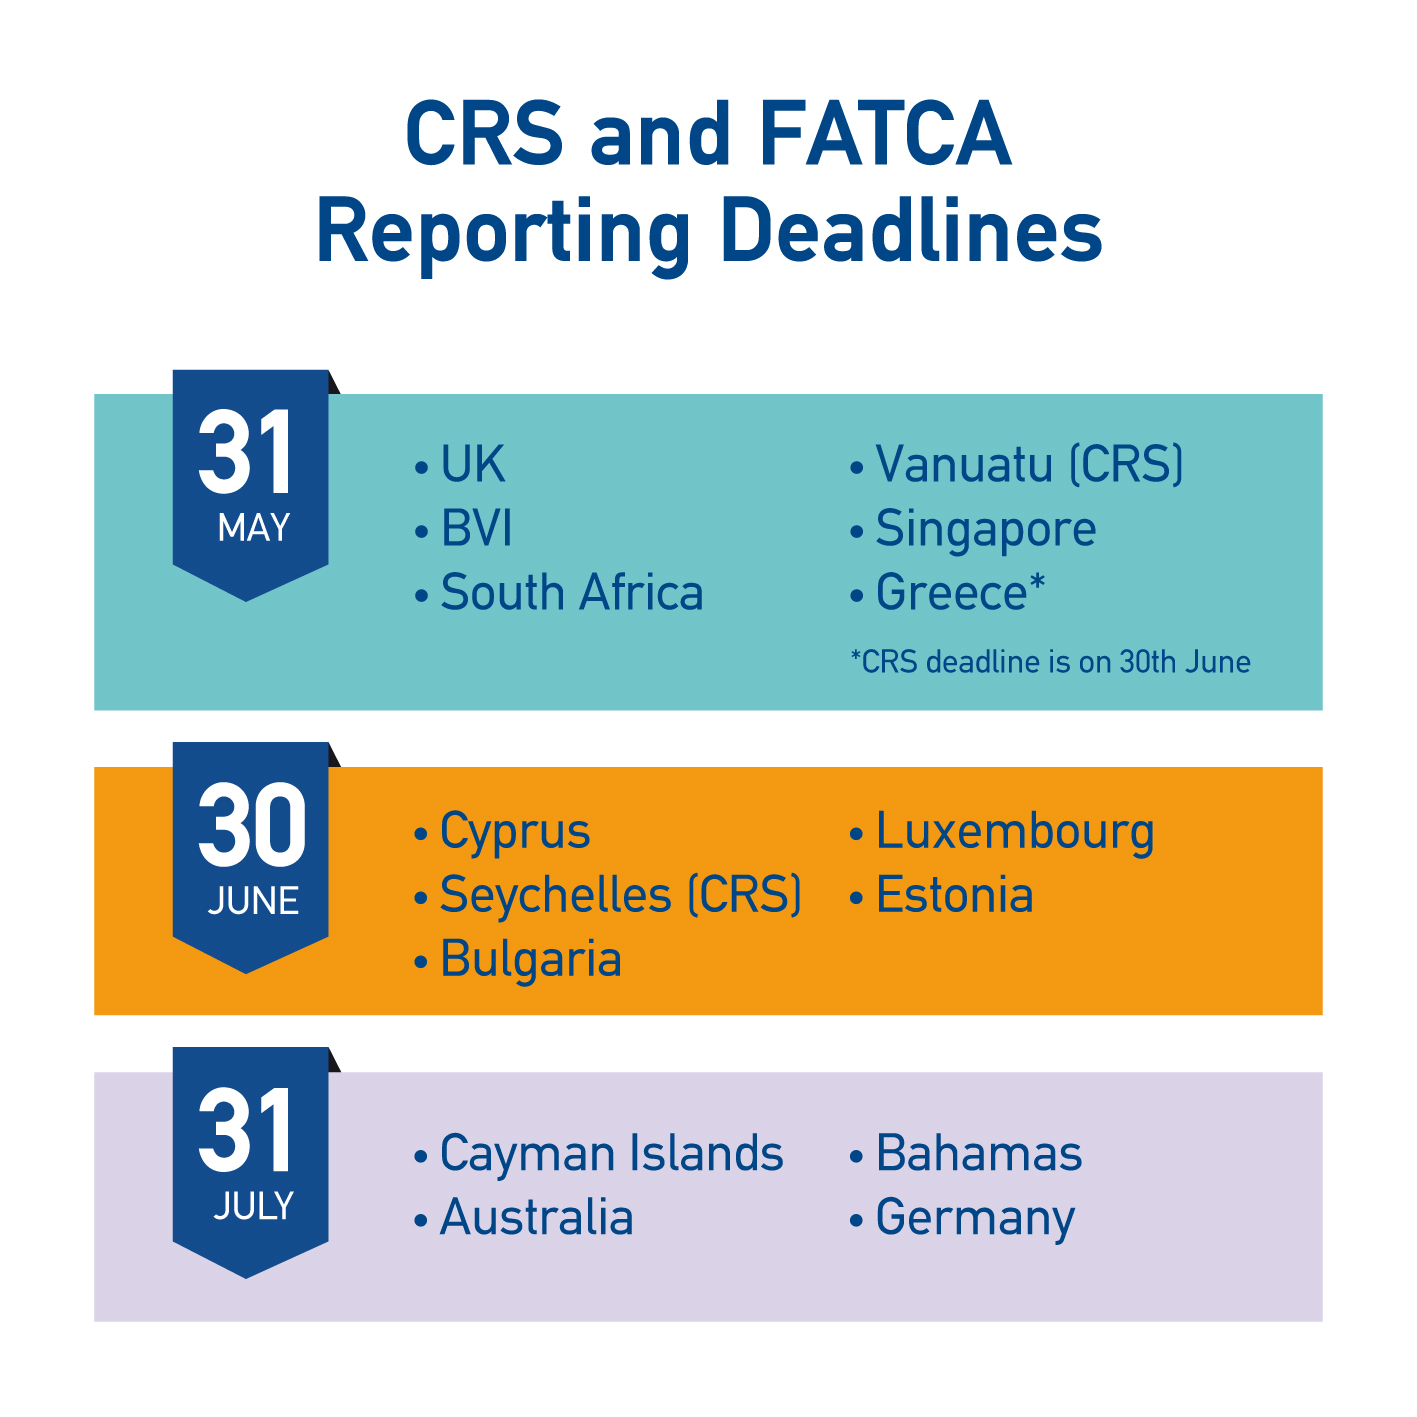 Challenges and Risks with your CRS and FATCA reporting.